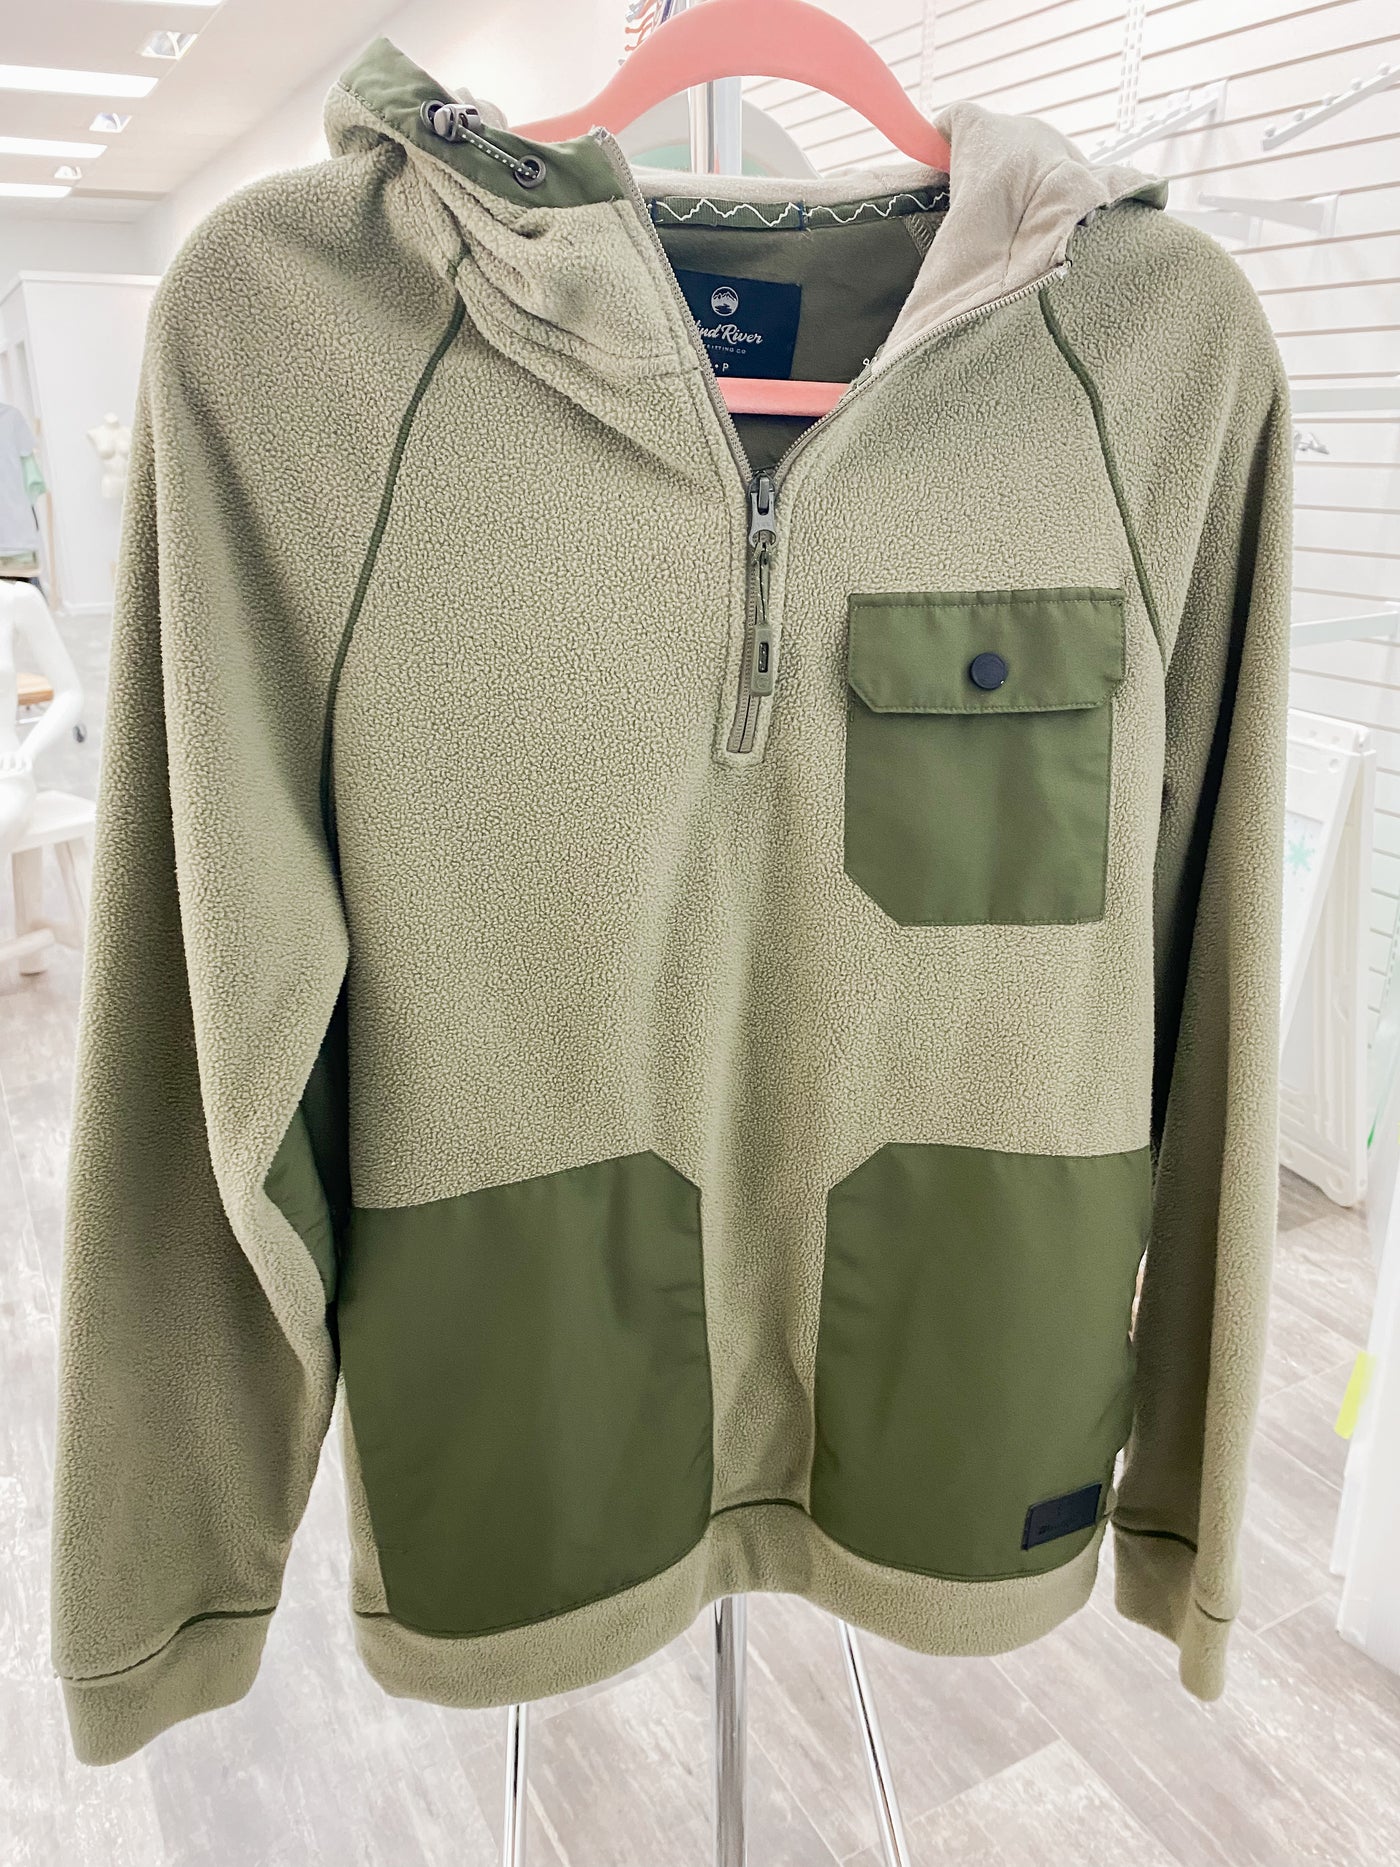 Wind River Outdoor Sweater